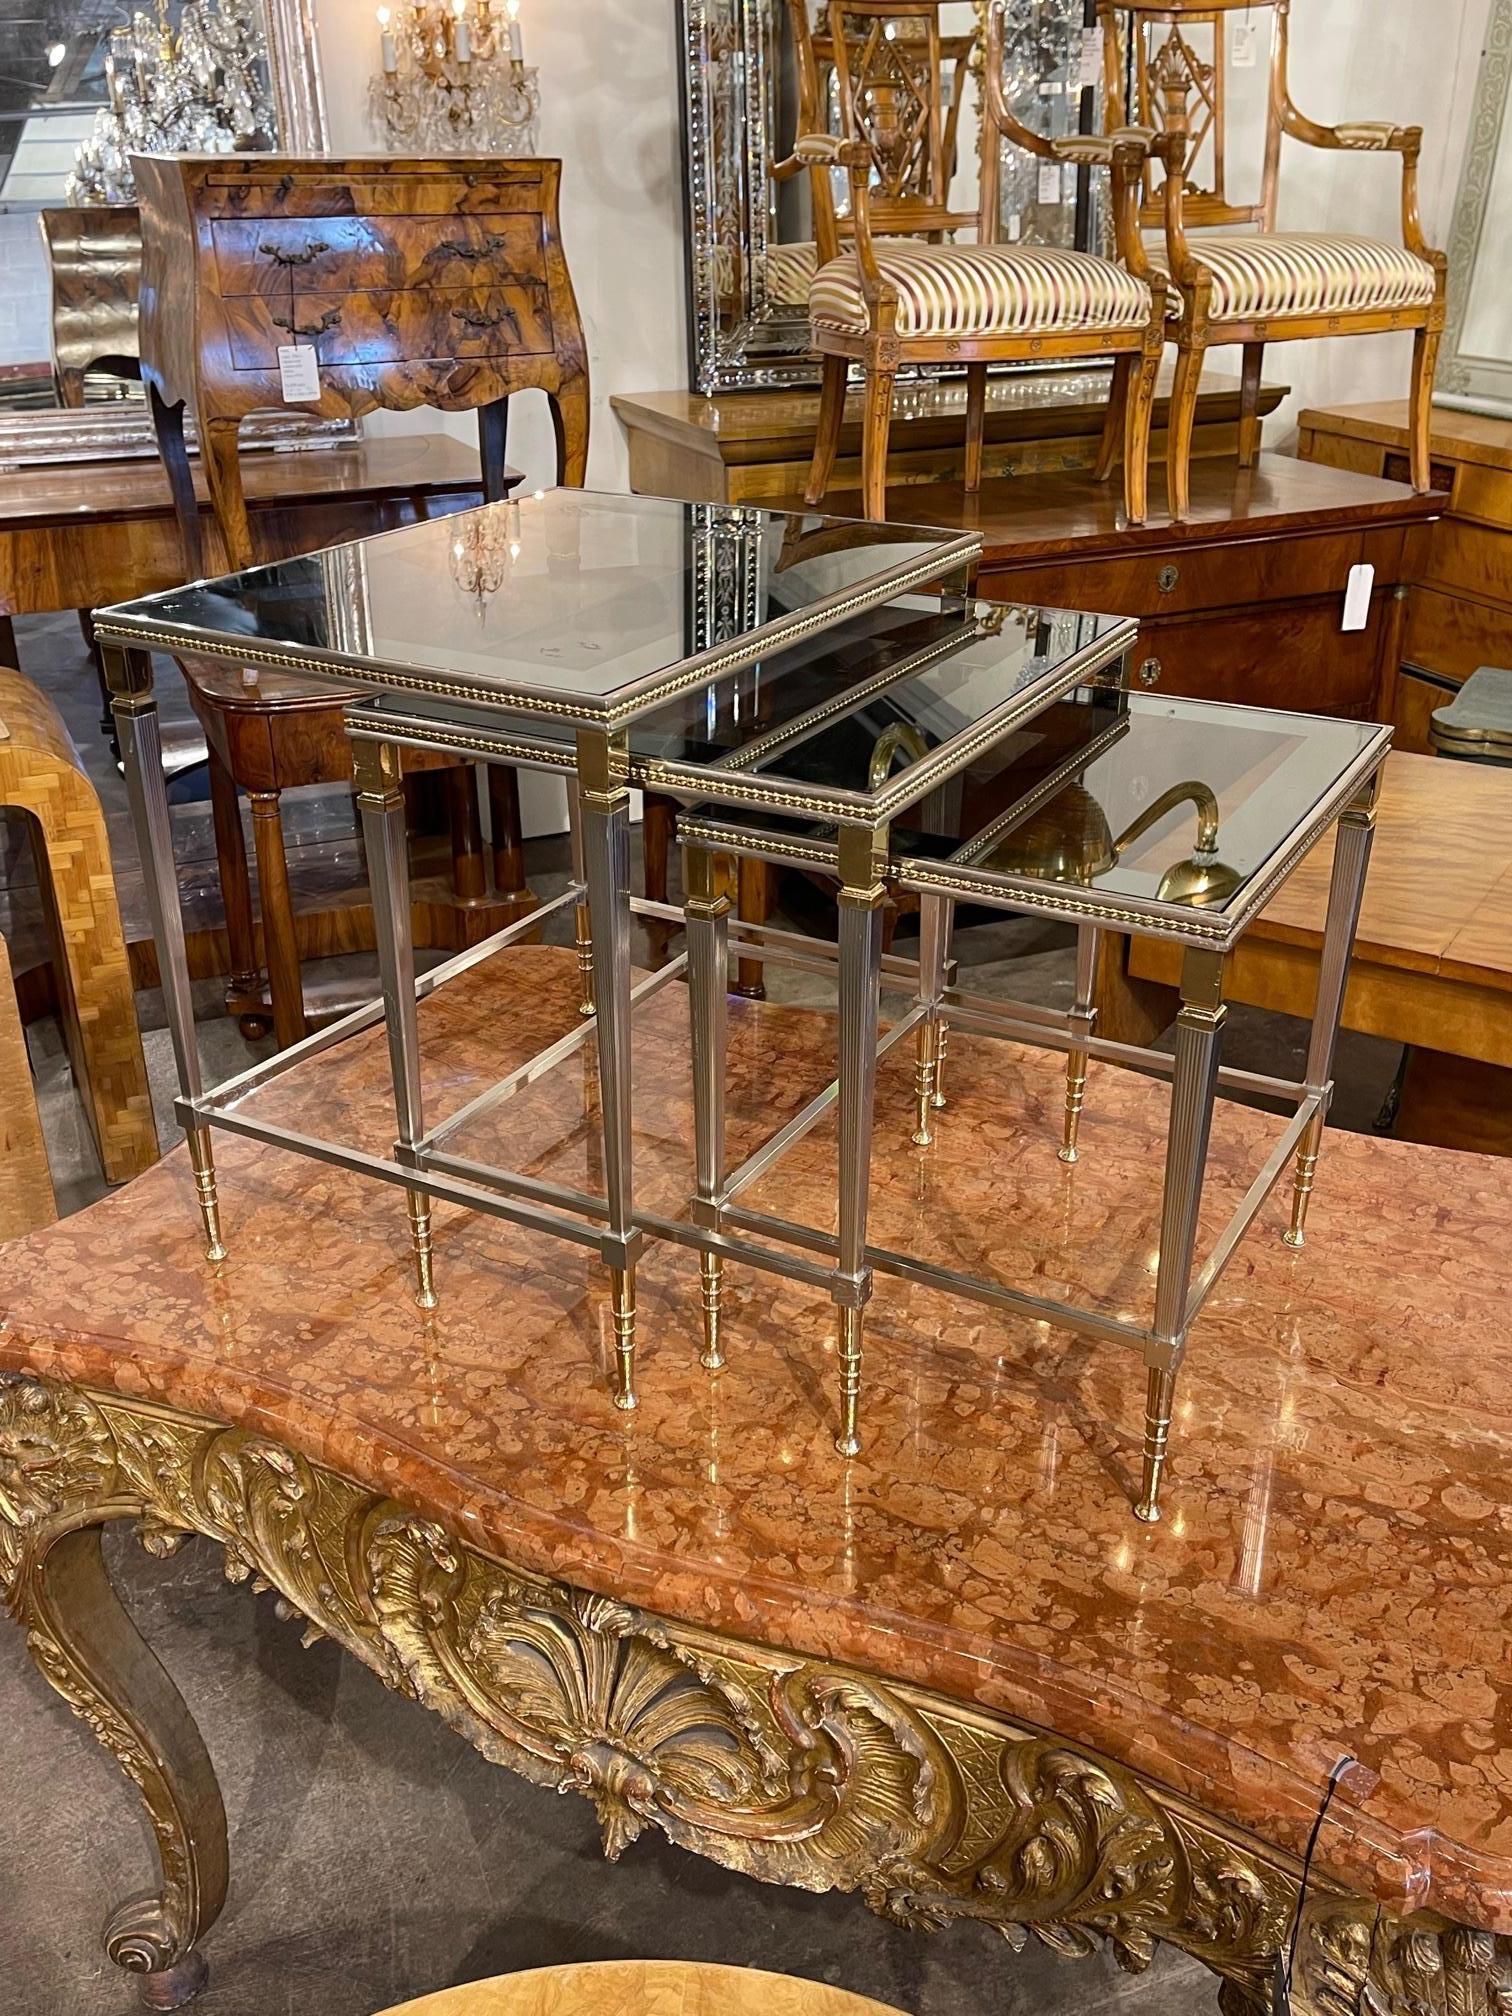 Very fine set of French Jansen style polished steel and brass nesting tables. A quality set with lots of pretty details. Beautiful!